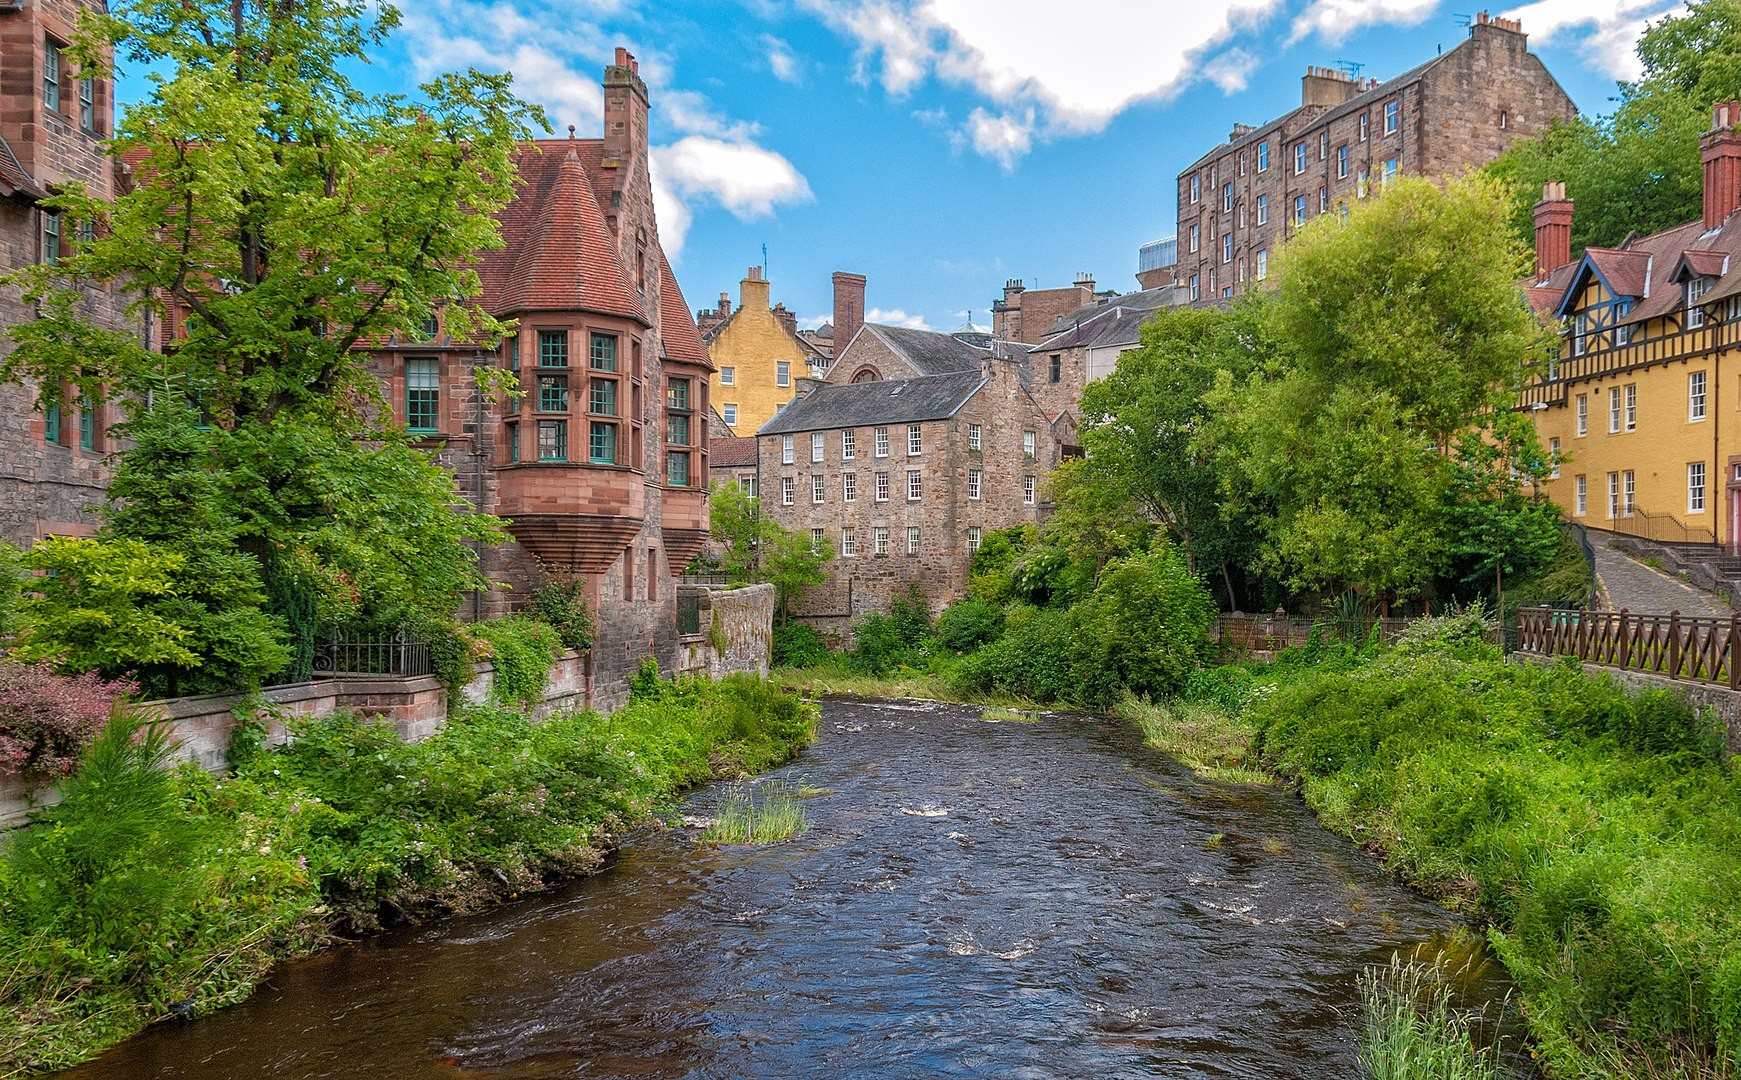 By Gary Campbell-Hall from Edinburgh, UK - Dean Village, Edinburgh, CC BY 2.0, https://commons.wikimedia.org/w/index.php?curid=71824178